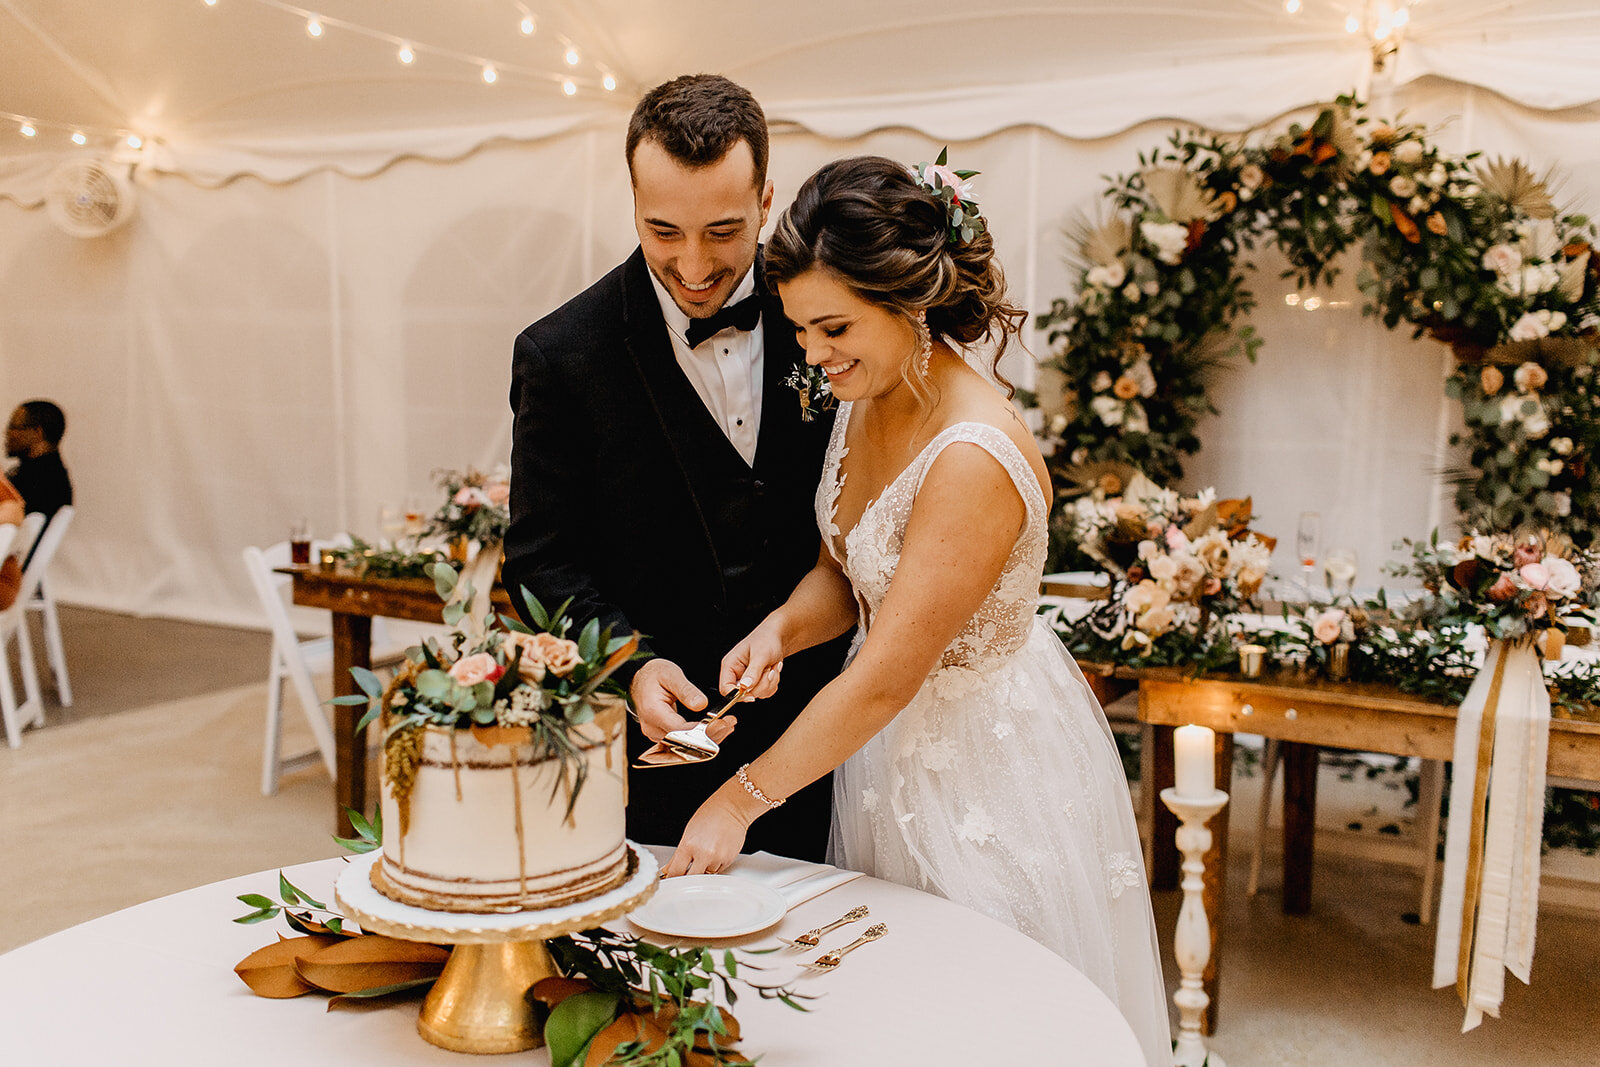 Whimsical Fall Wedding at Emerson Creek captured by Rachel Mae Photography | CHI thee WED